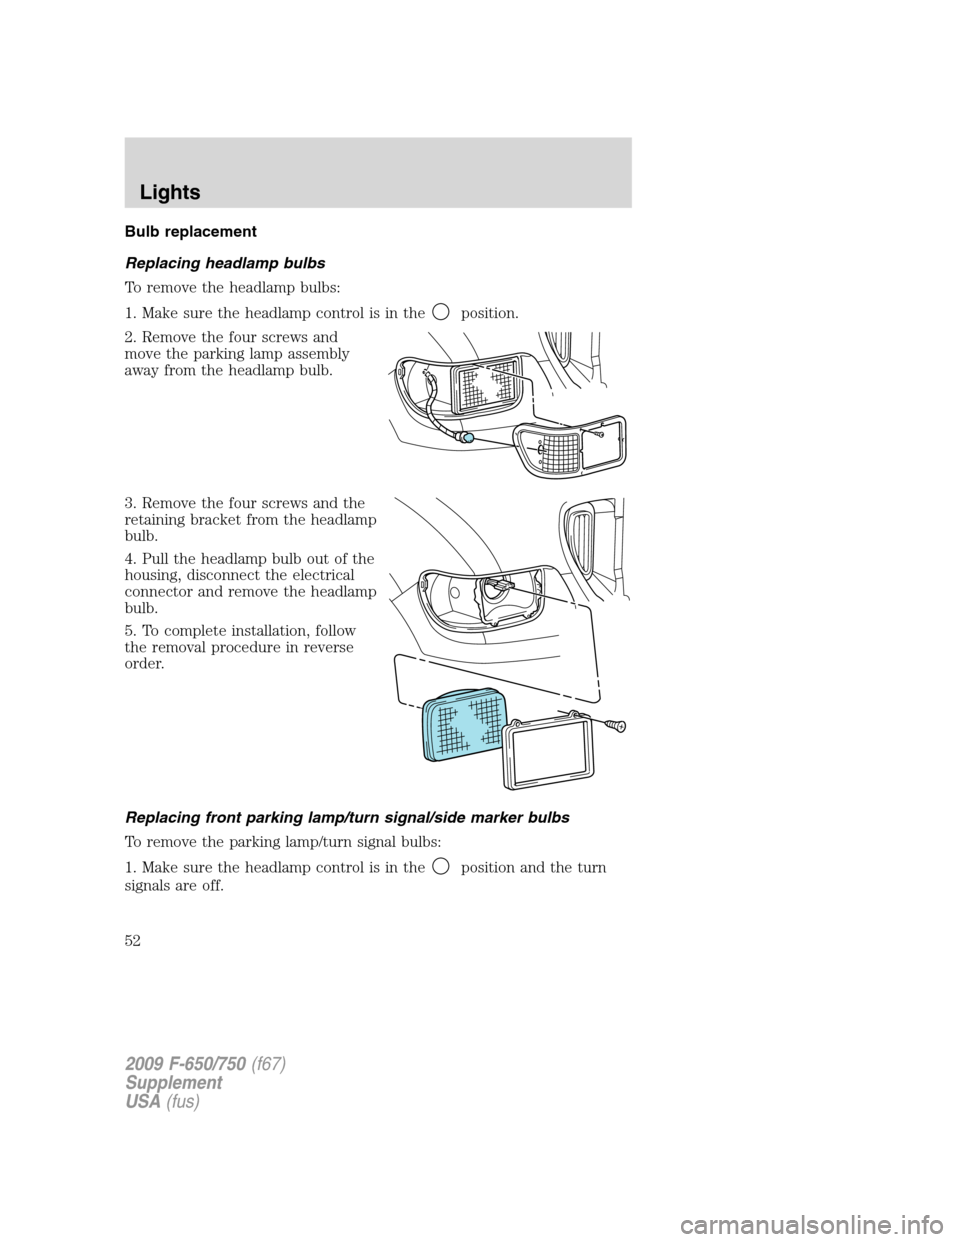 FORD F750 2009 12.G Owners Manual Bulb replacement
Replacing headlamp bulbs
To remove the headlamp bulbs:
1. Make sure the headlamp control is in the
position.
2. Remove the four screws and
move the parking lamp assembly
away from the